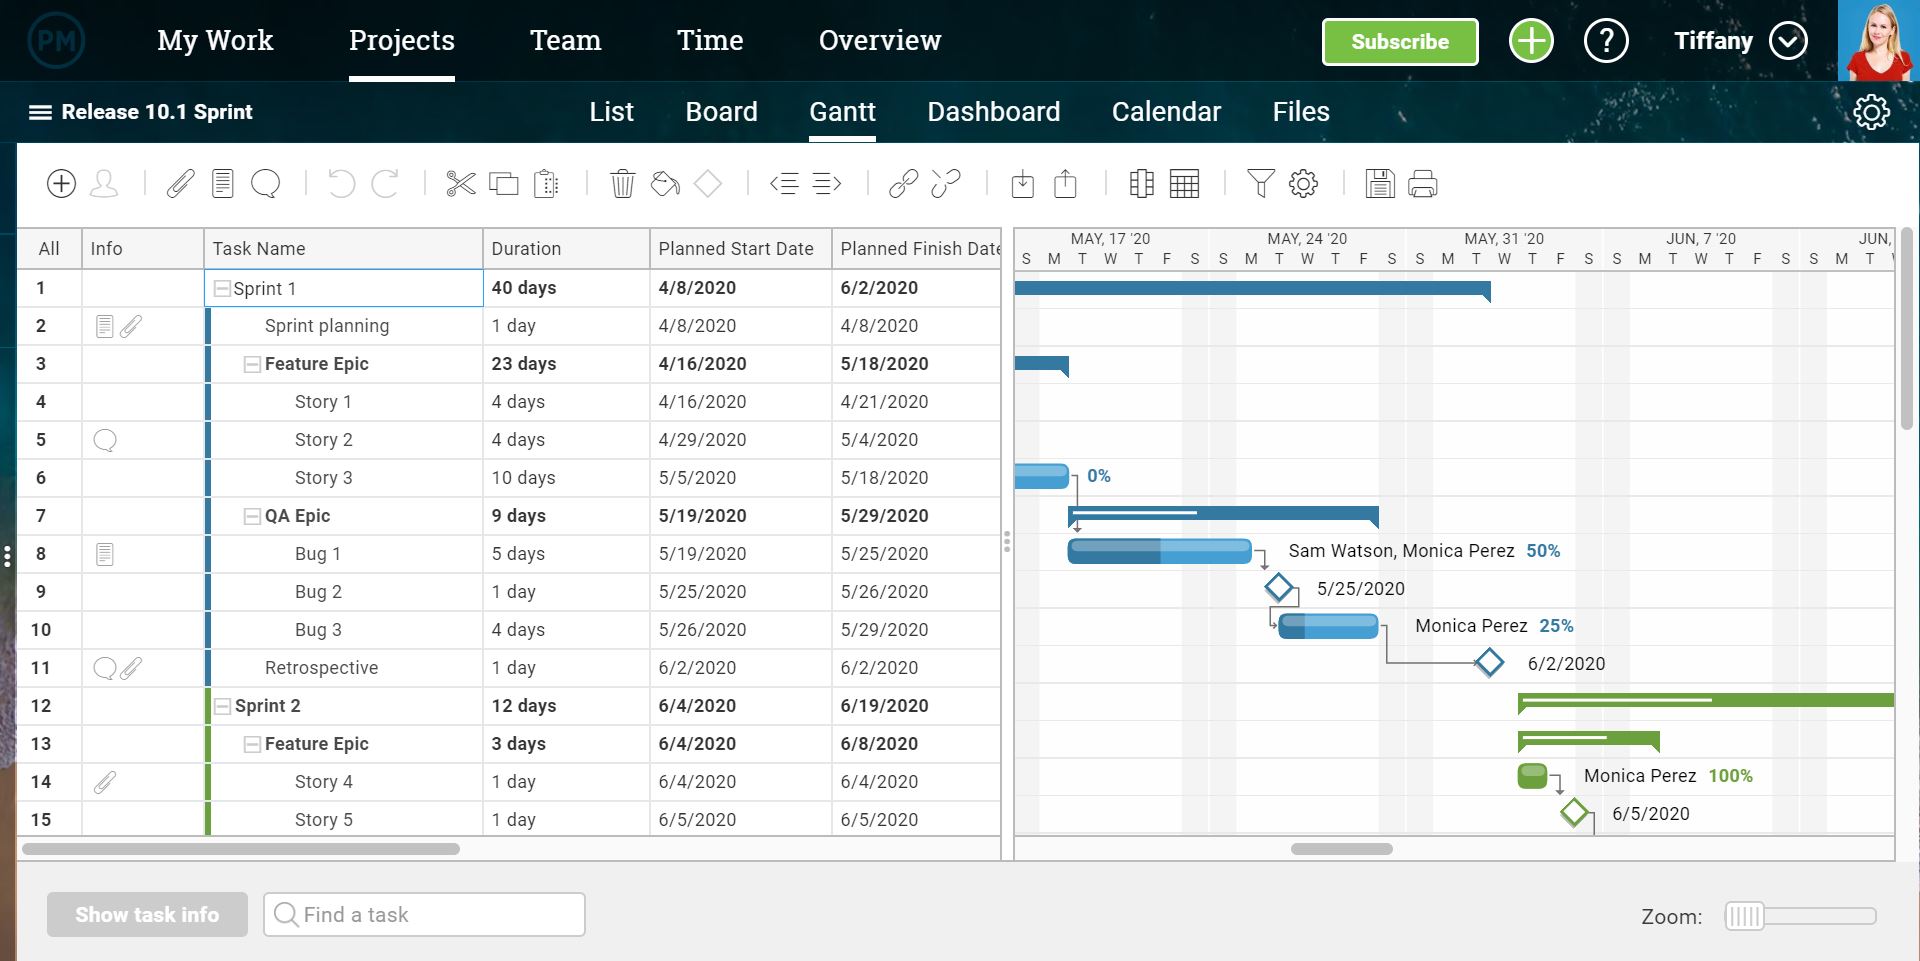 A screenshot of ProjectManager.com's gantt chart software, showing a list of task on the left, and those tasks displayed as bars on a graph on the right.